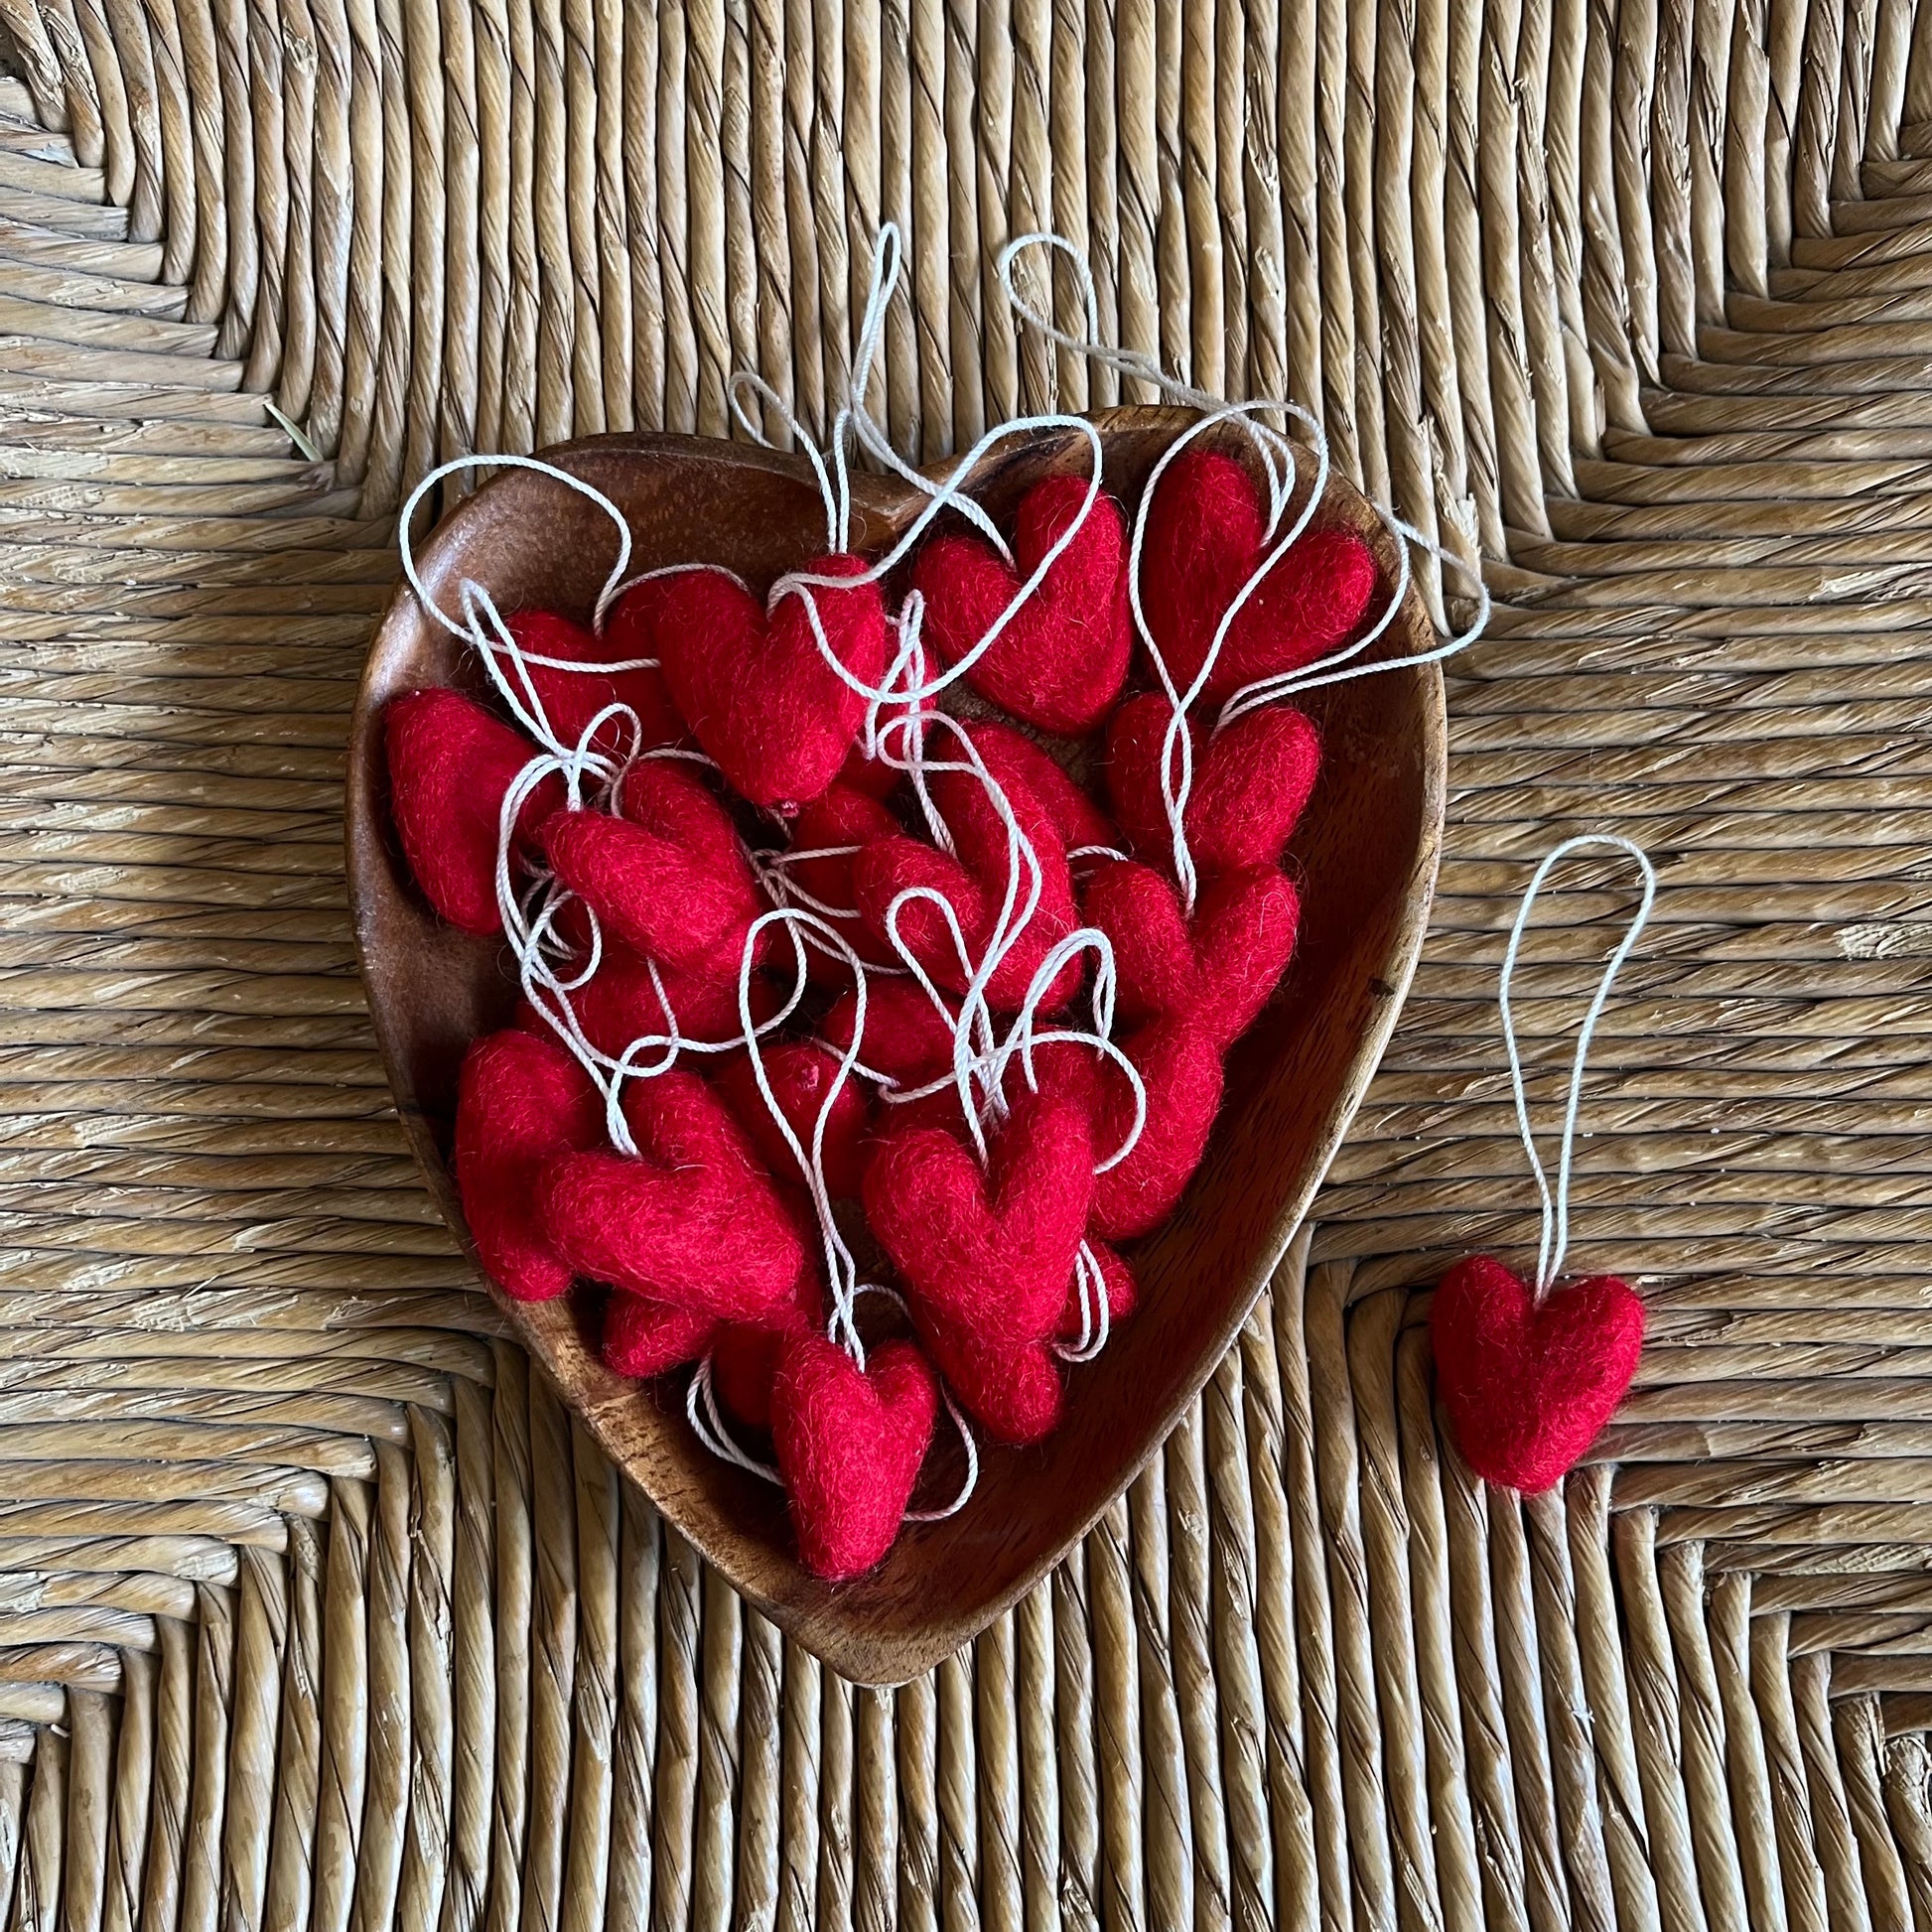 Handmade felted wool red hearts in heart-shaped bowl